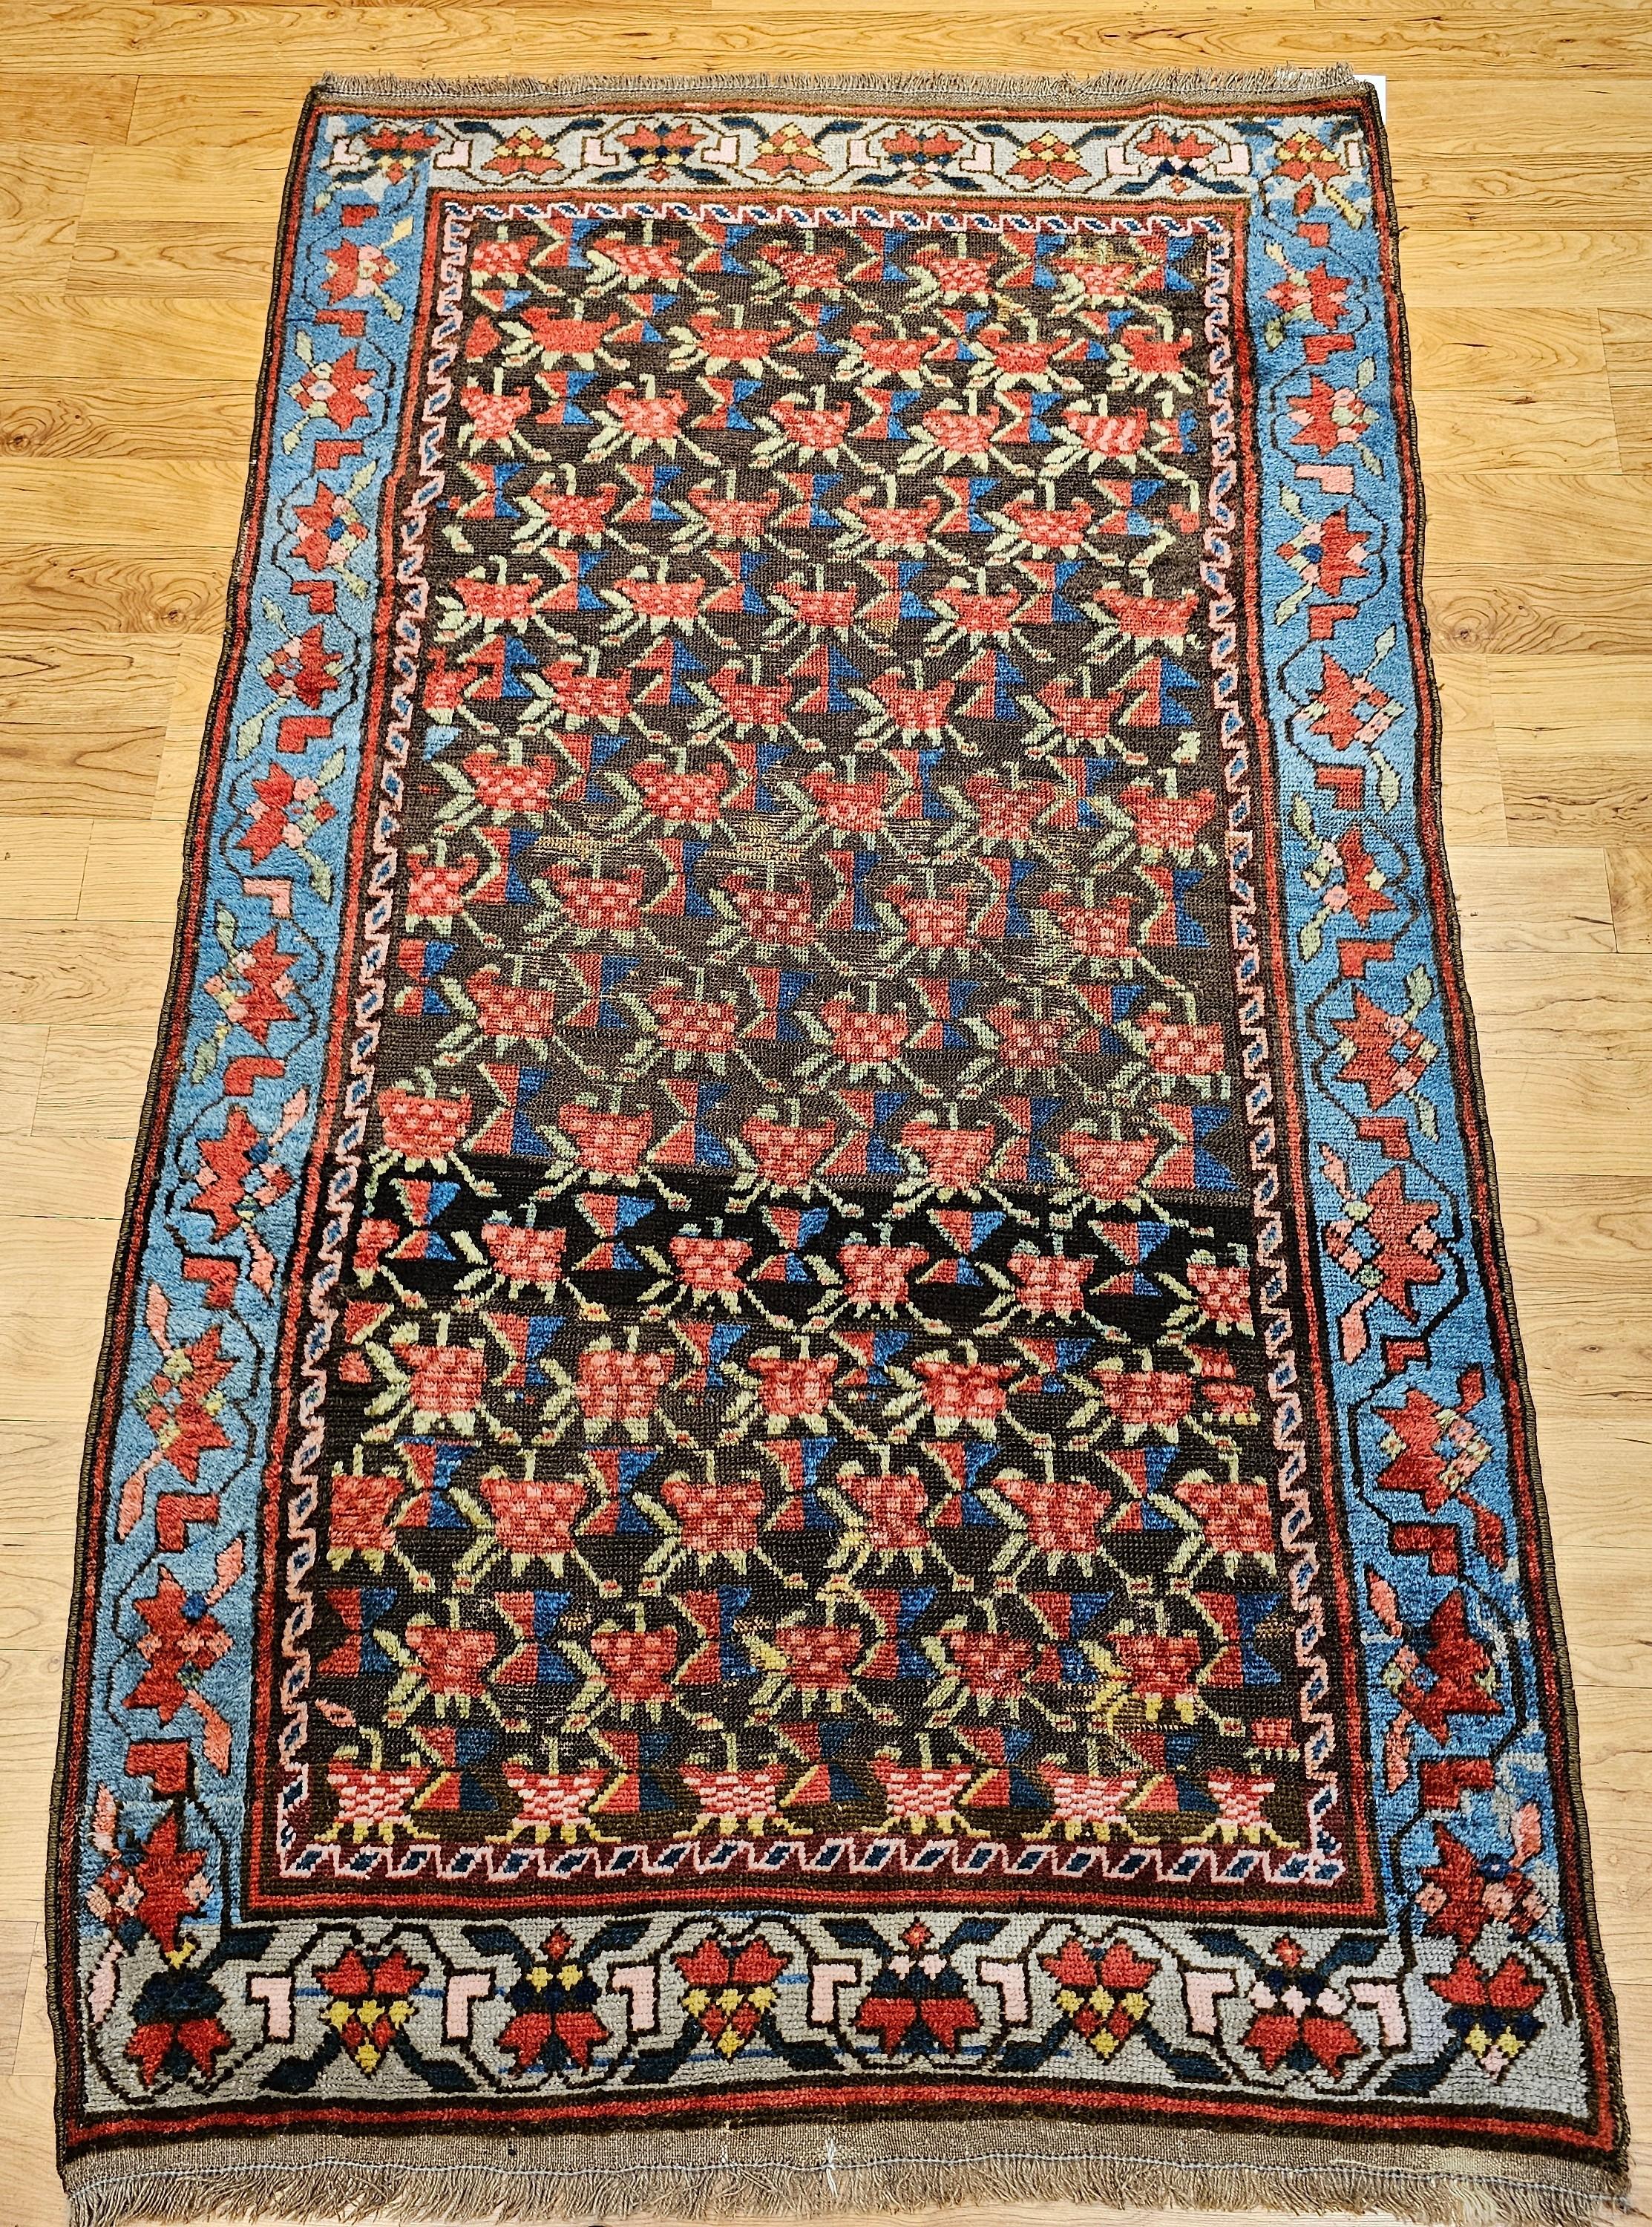 Vintage Karabagh area rug from the Armenian village weavers of the Caucasus mountains has a wonderful allover pattern in brown, royal blue, red, green, and yellow. It has a wonderful abrash brown/black field color which sets up beautifully the